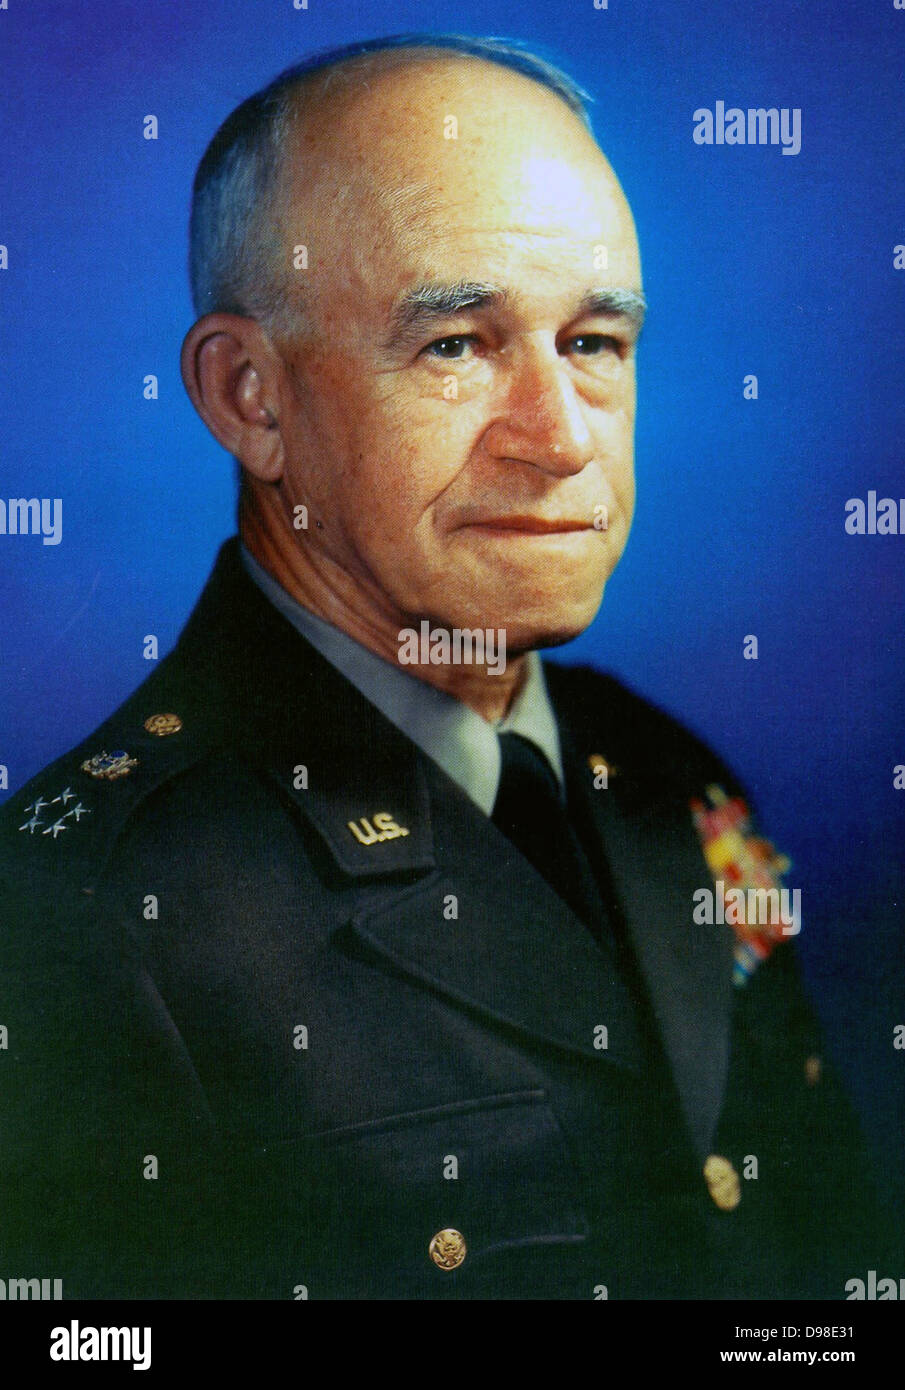 Omar Nelson Bradley (1893-1981) American general, U.S. Army field commander in both North Africa and Europe during the Second World War. Appointed first Chairman of the Joint Chiefs of Staff, September 1950, by President Truman. Stock Photo